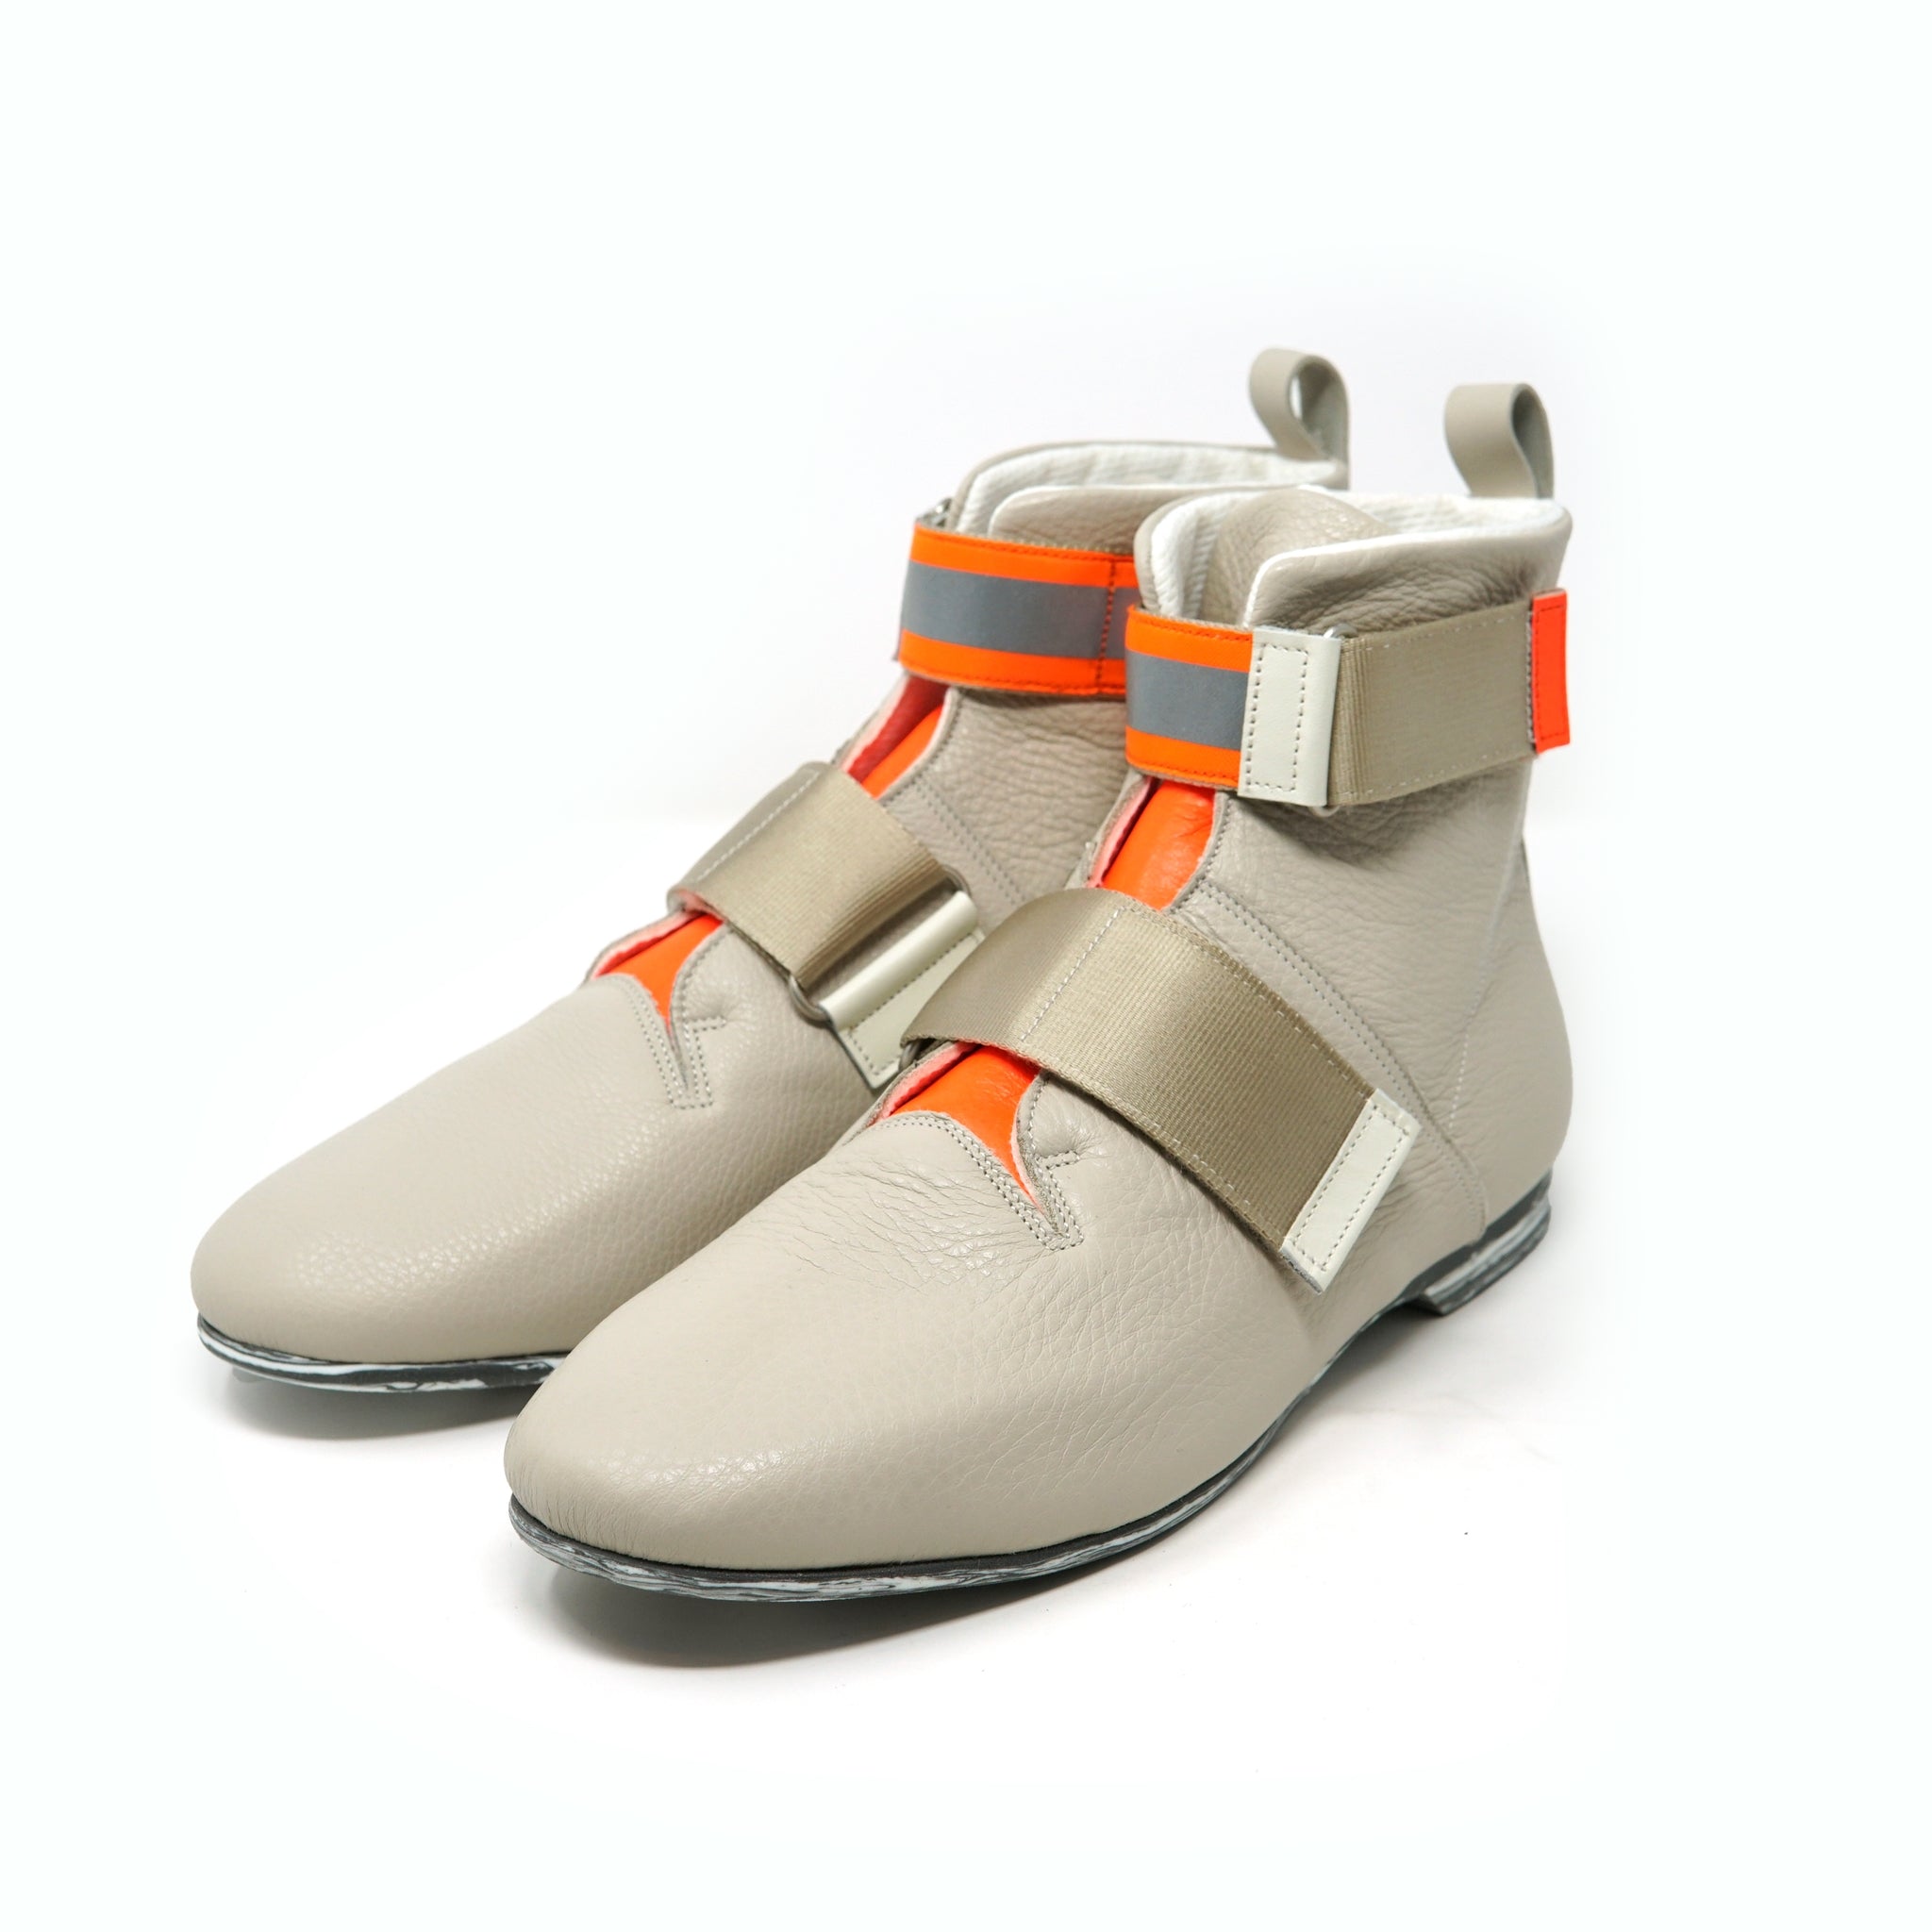 No:bsd22AW-33_A | Name:Safety Leather Boots | Color:White【BEDSIDEDRAMA_ベッドサイドドラマ】